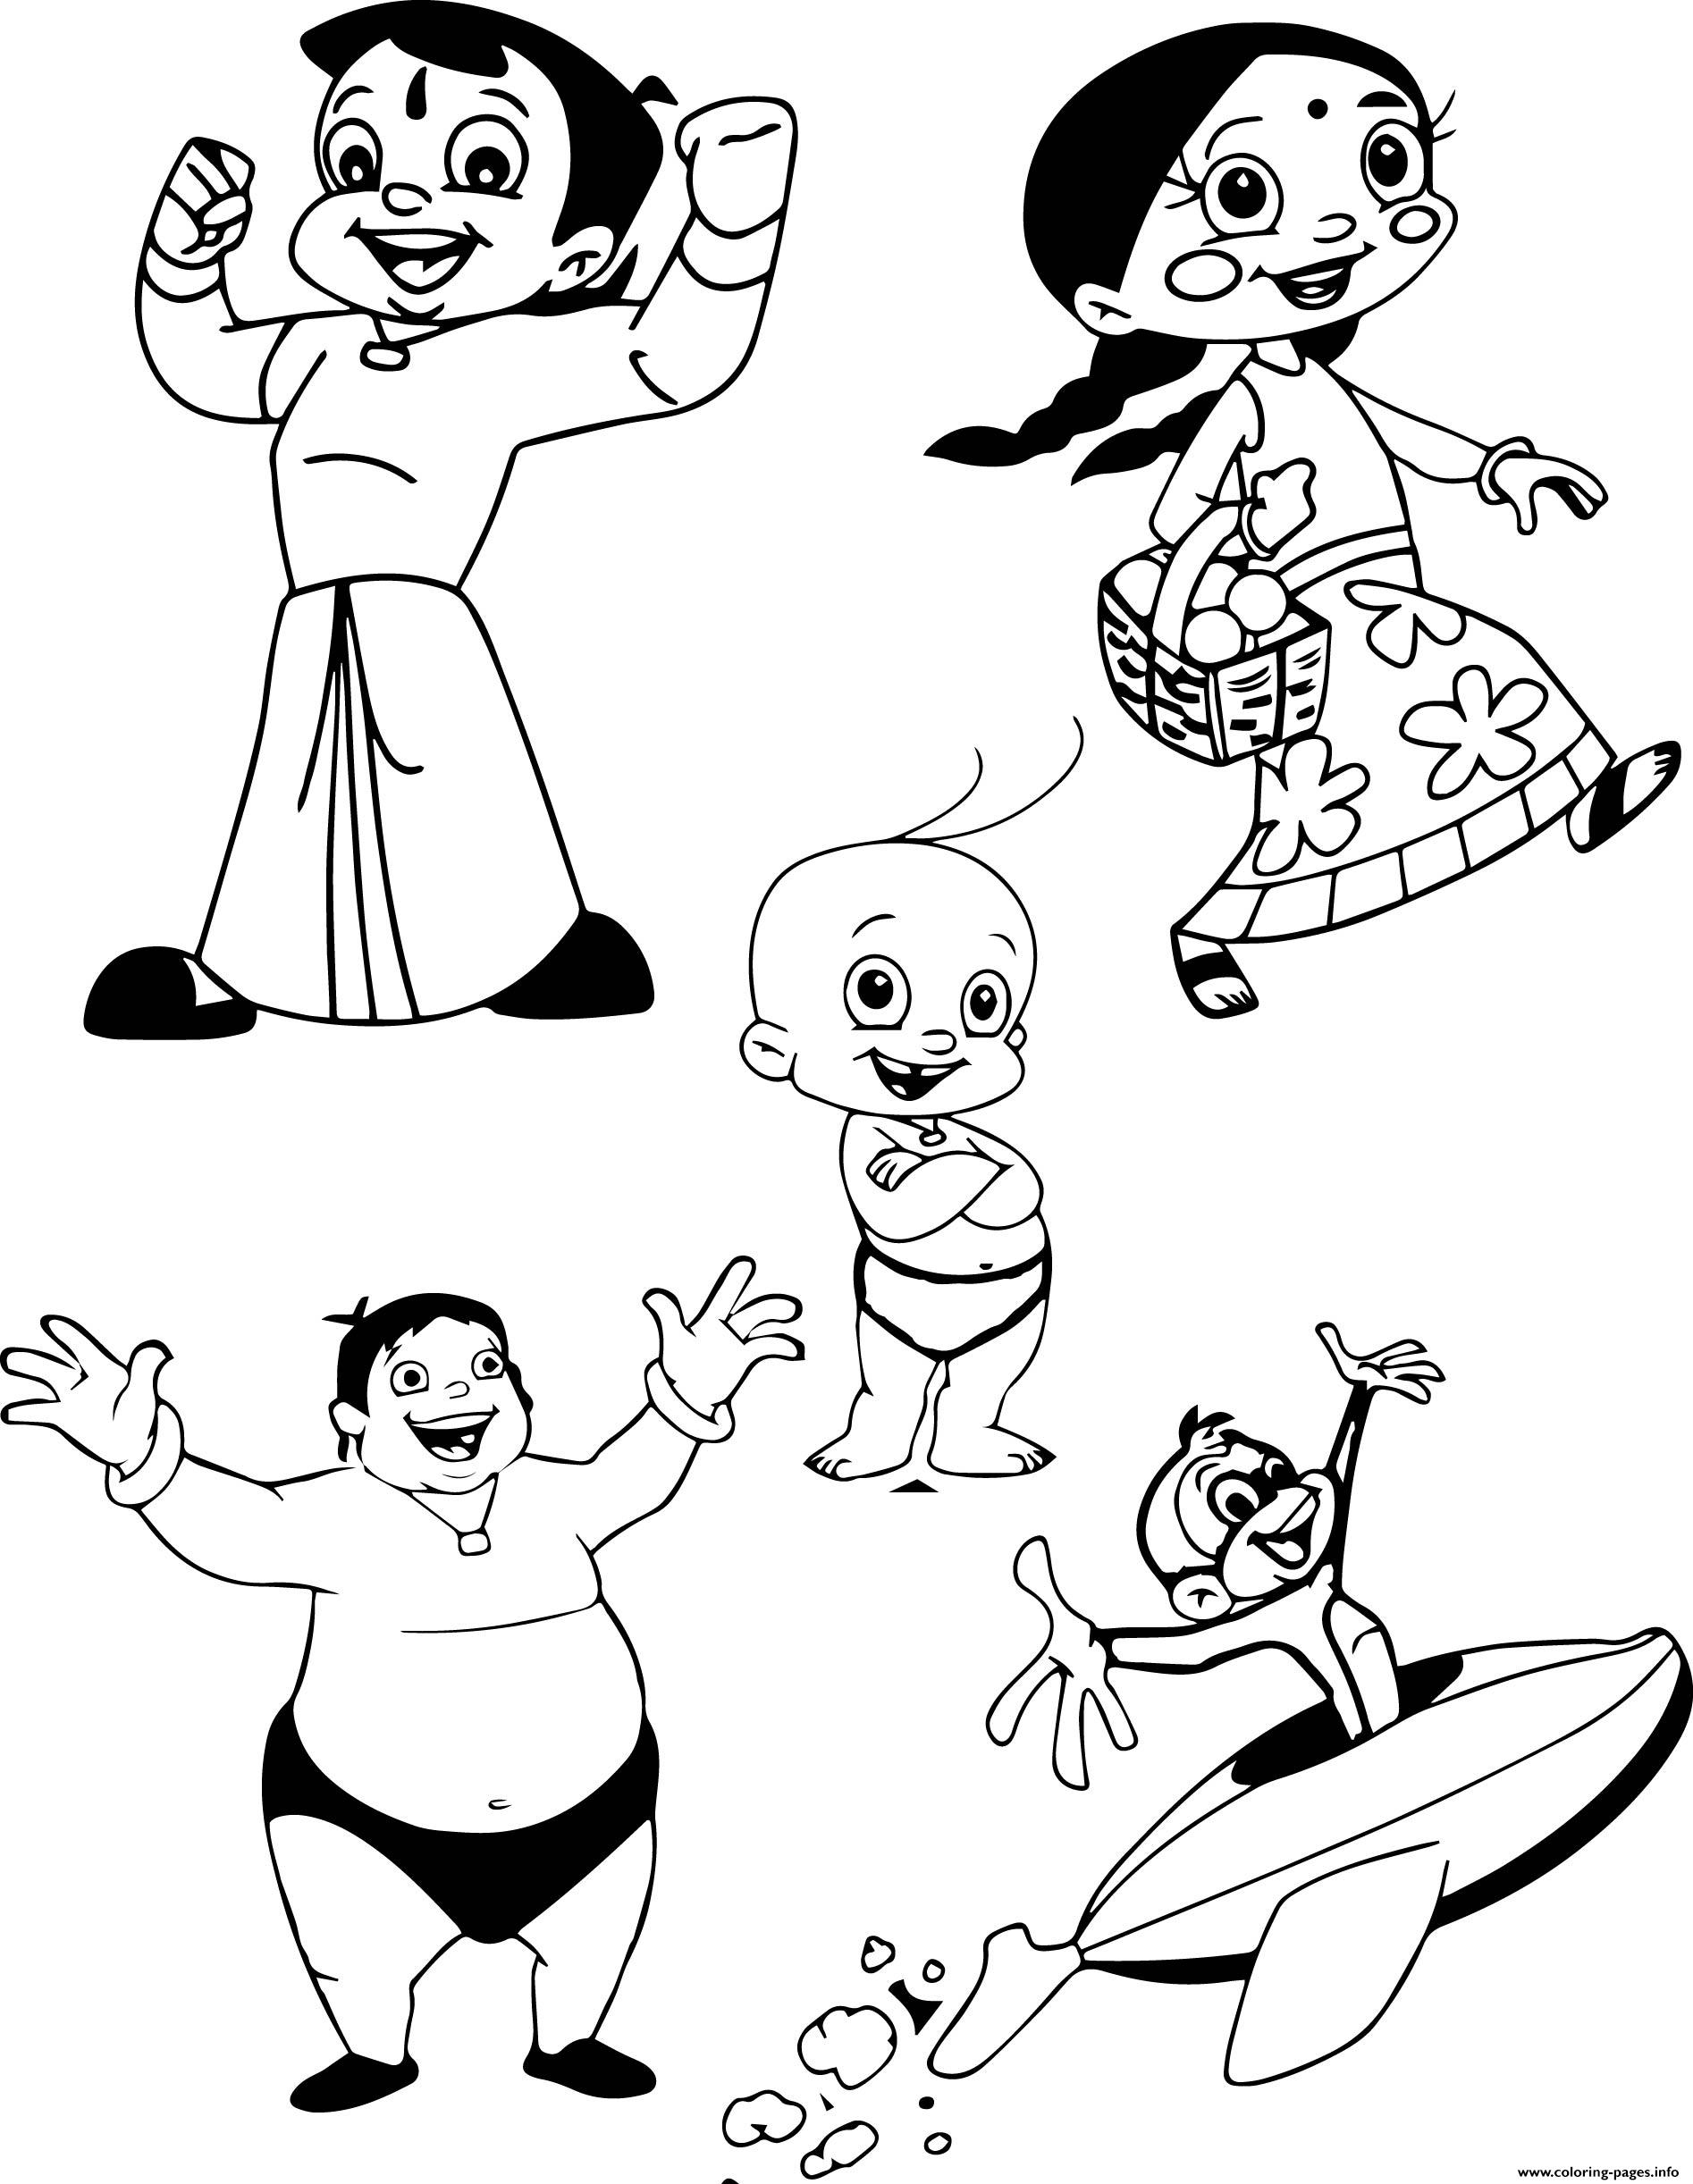 Chota Bheem Coloring Pages Chhota Bheem Characters Coloring Pages Printable